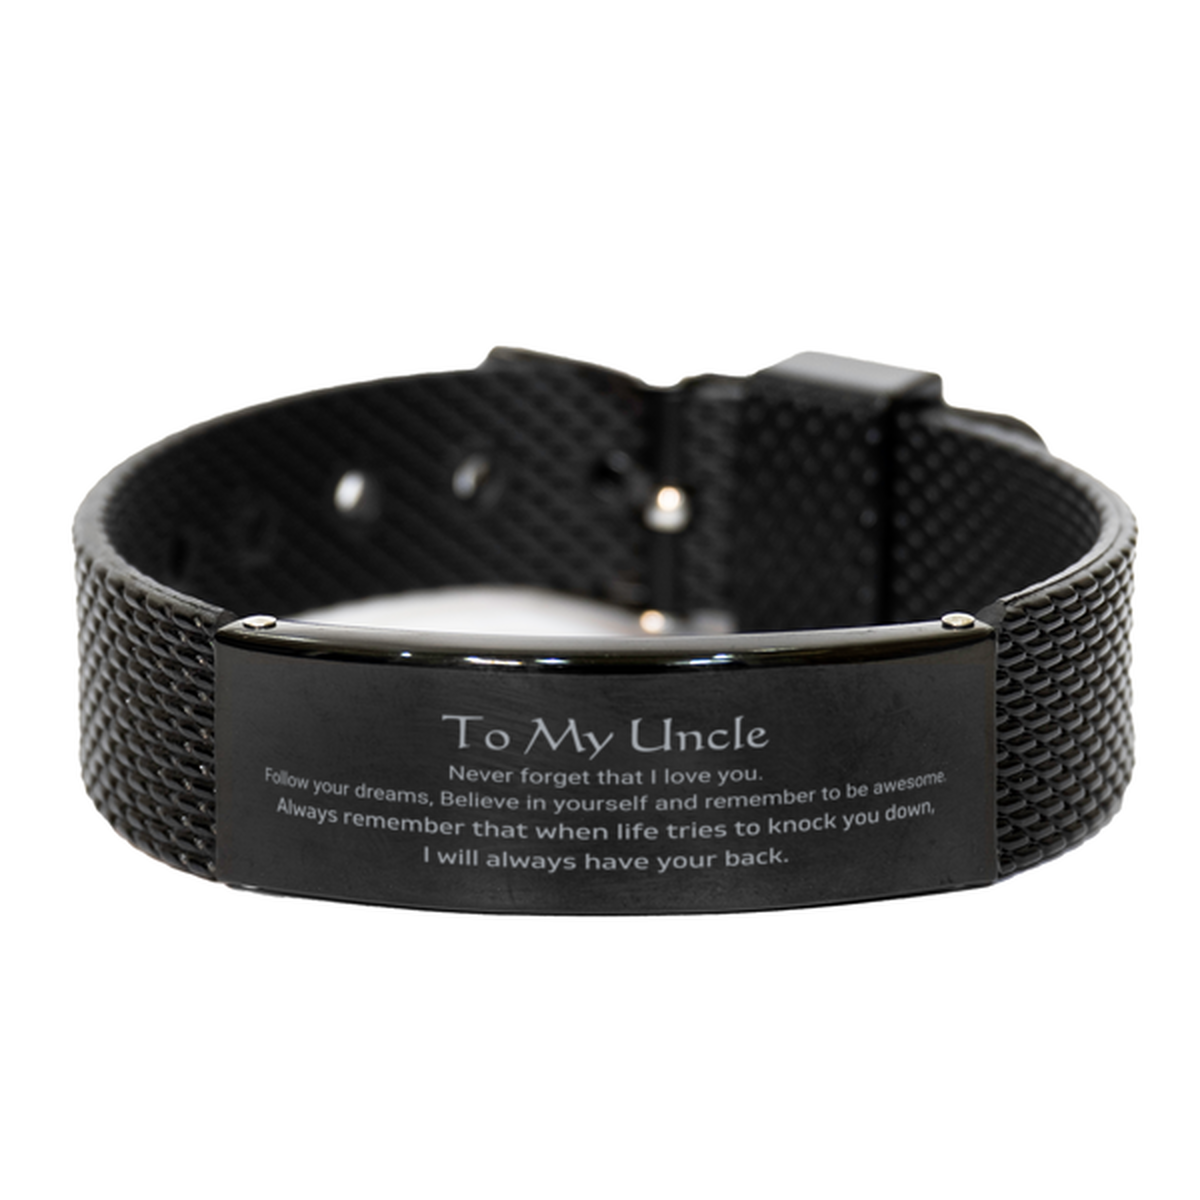 Inspirational Gifts for Uncle, Follow your dreams, Believe in yourself, Uncle Black Shark Mesh Bracelet, Birthday Christmas Unique Gifts For Uncle